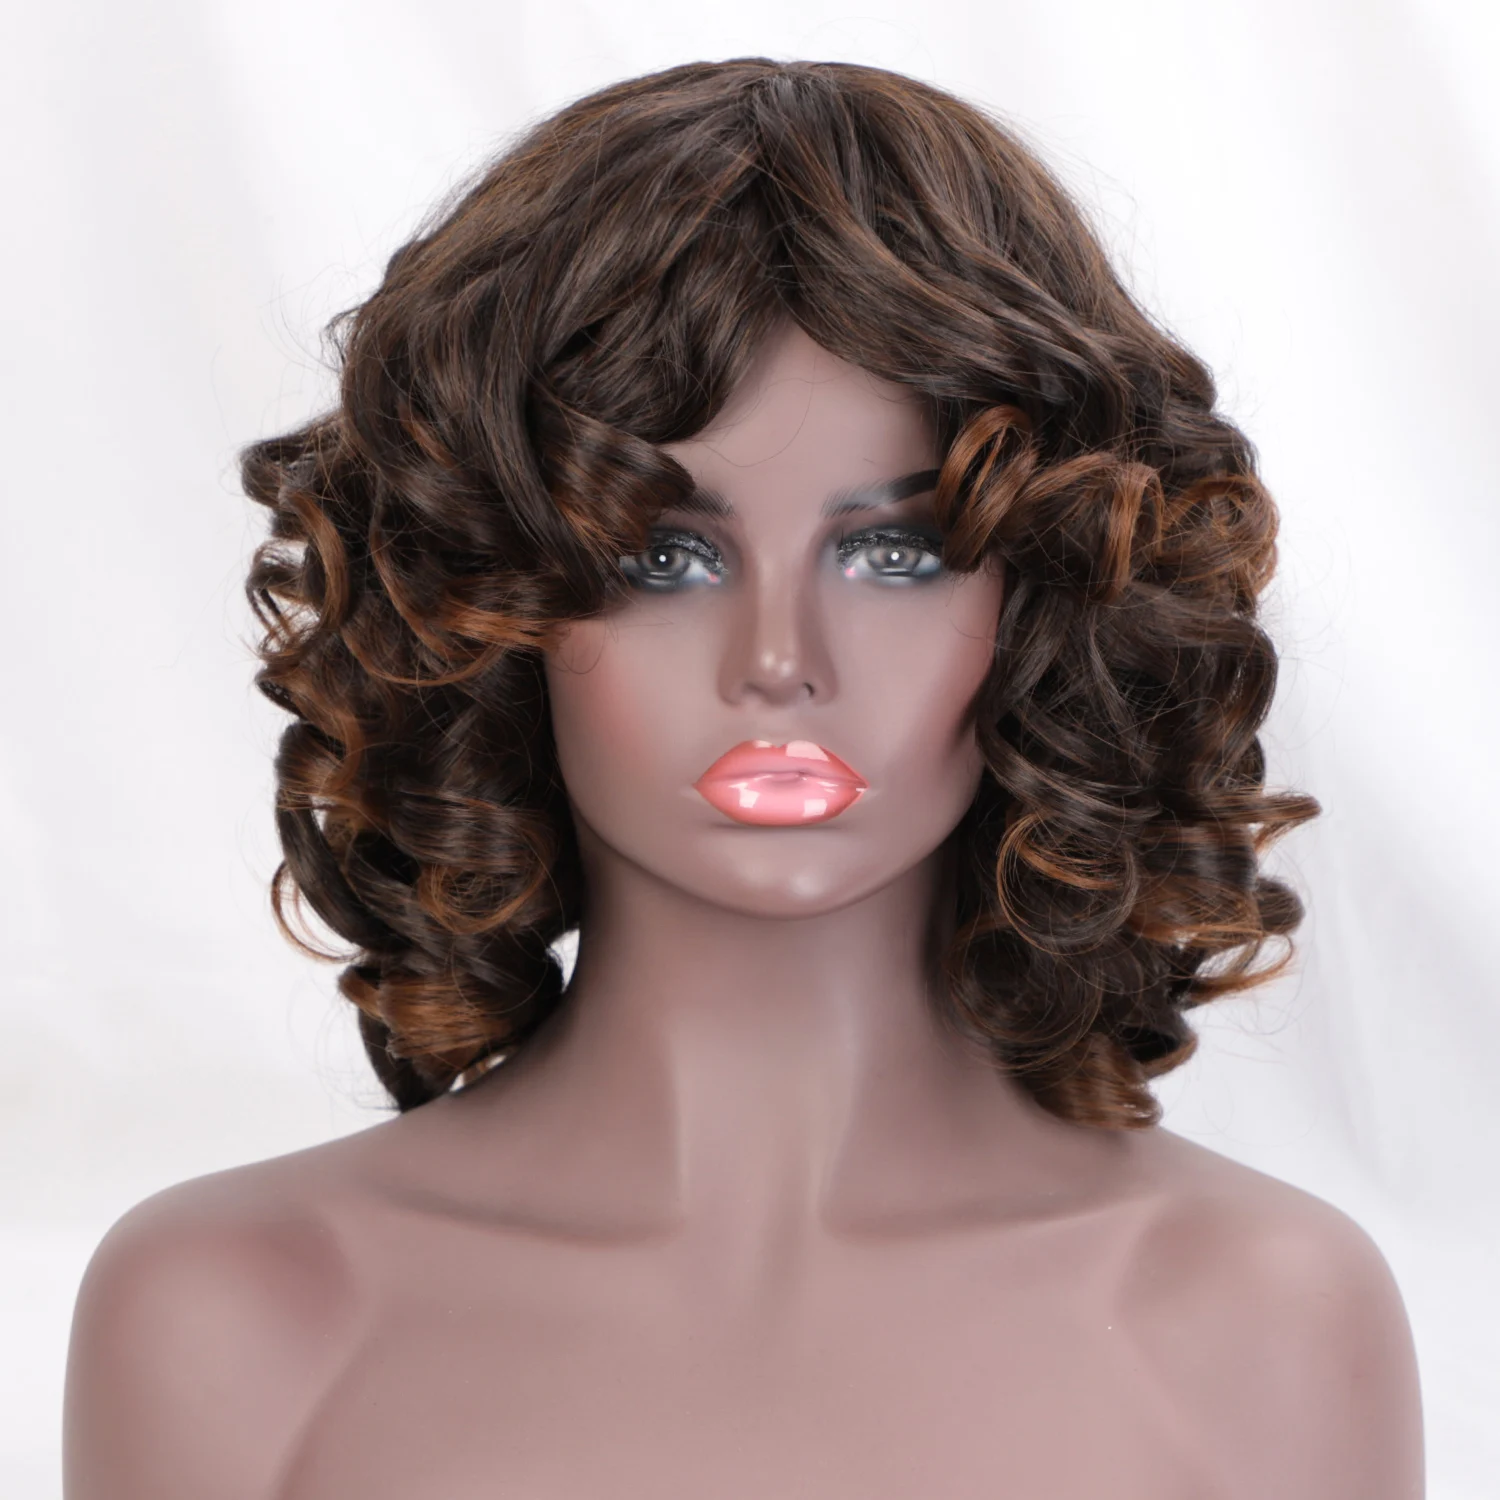 

Aisi Hair Vendor Cheap Wholesale Curly Loose Wave Short Bob Ombre Brown Wig With Bangs For Black Women Synthetic Hair Wigs